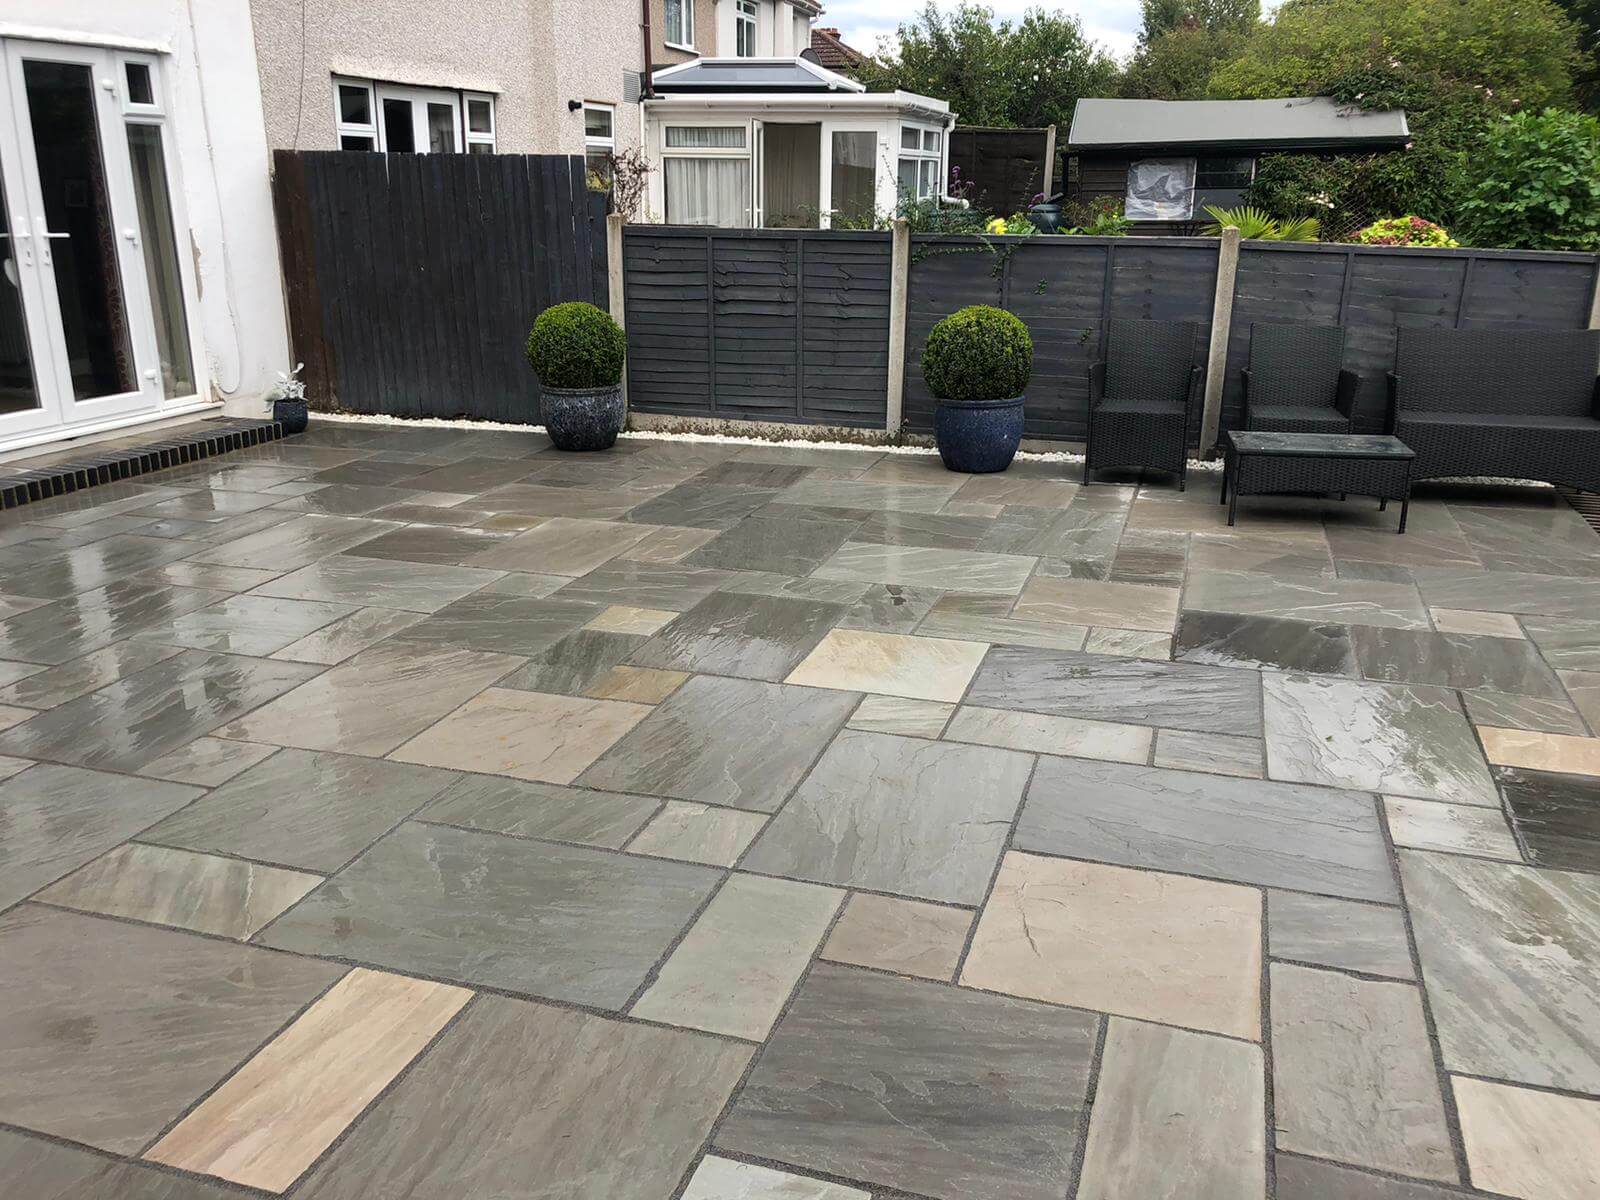 Indian Sandstone Paving Contractor Ladywell SE13